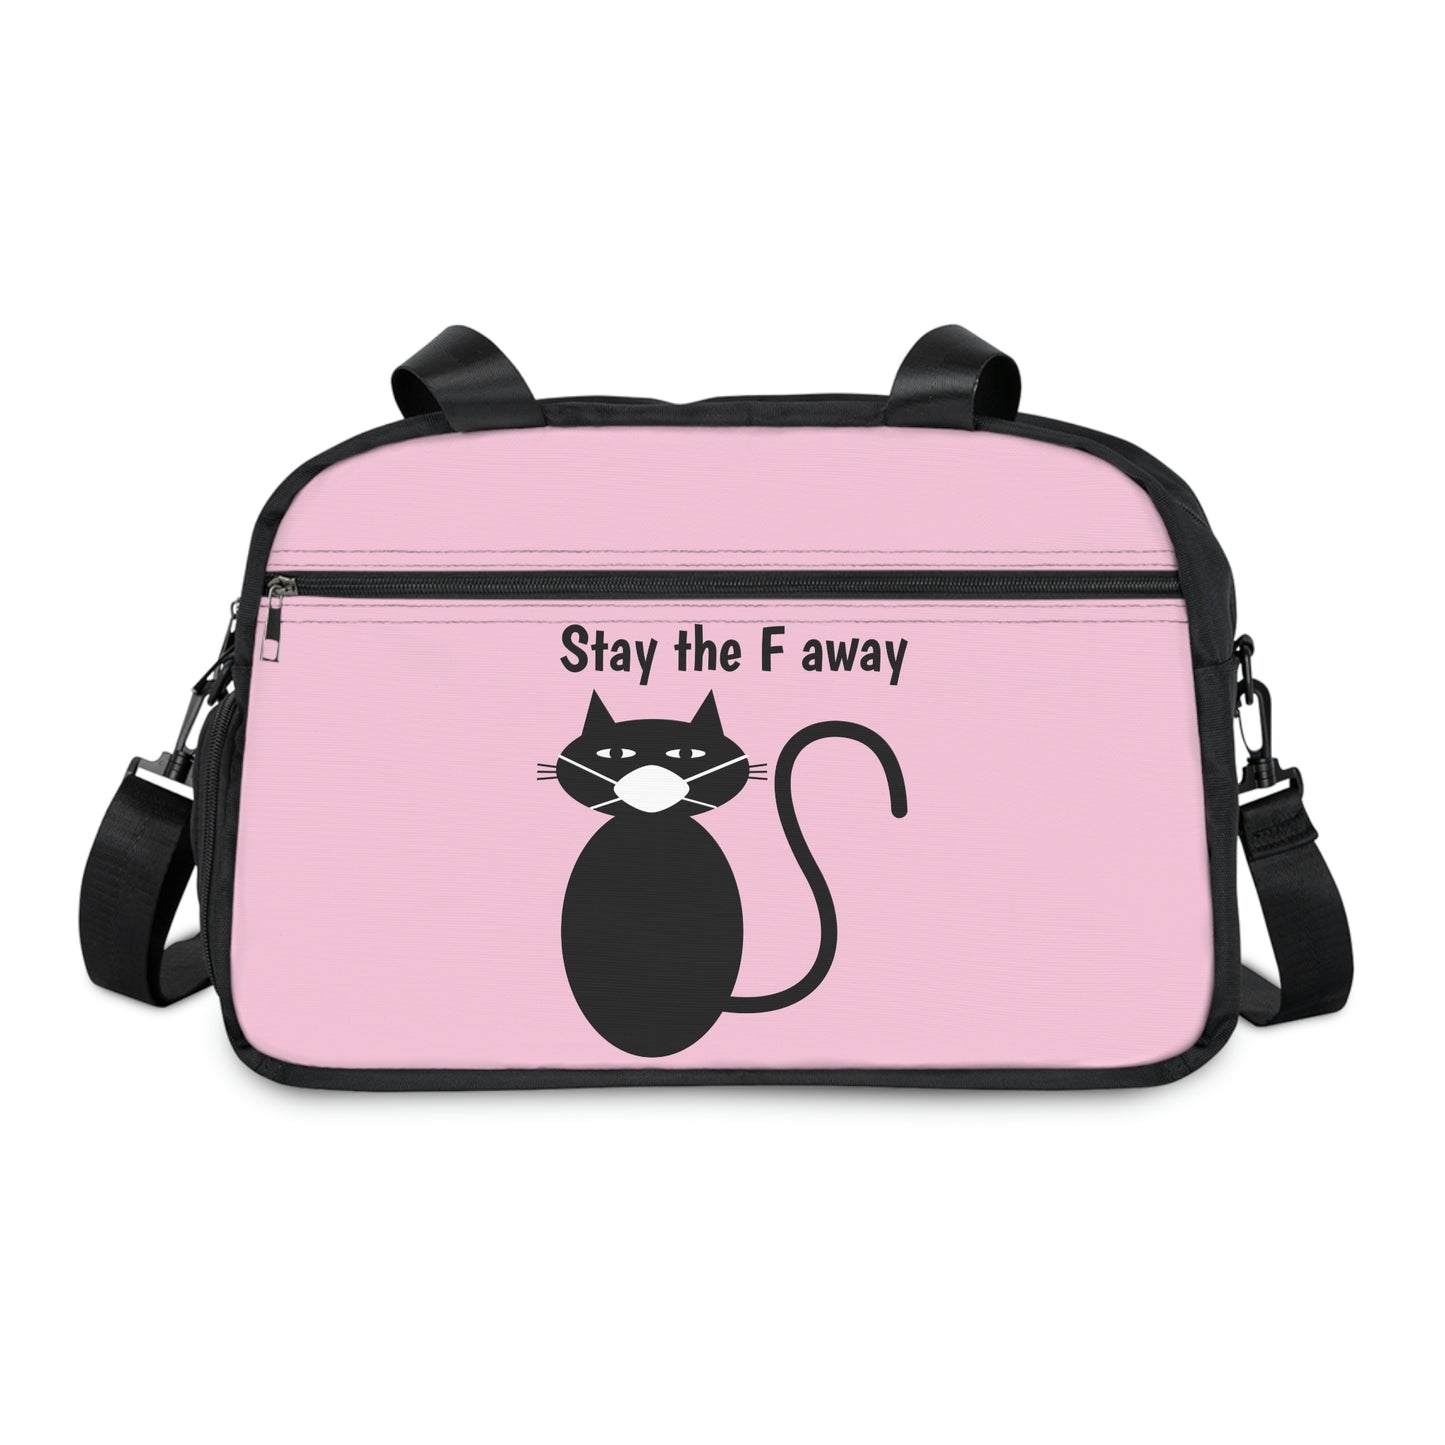 Funny Black cat wearing mask says Stay the F away pink Fitness Handbag